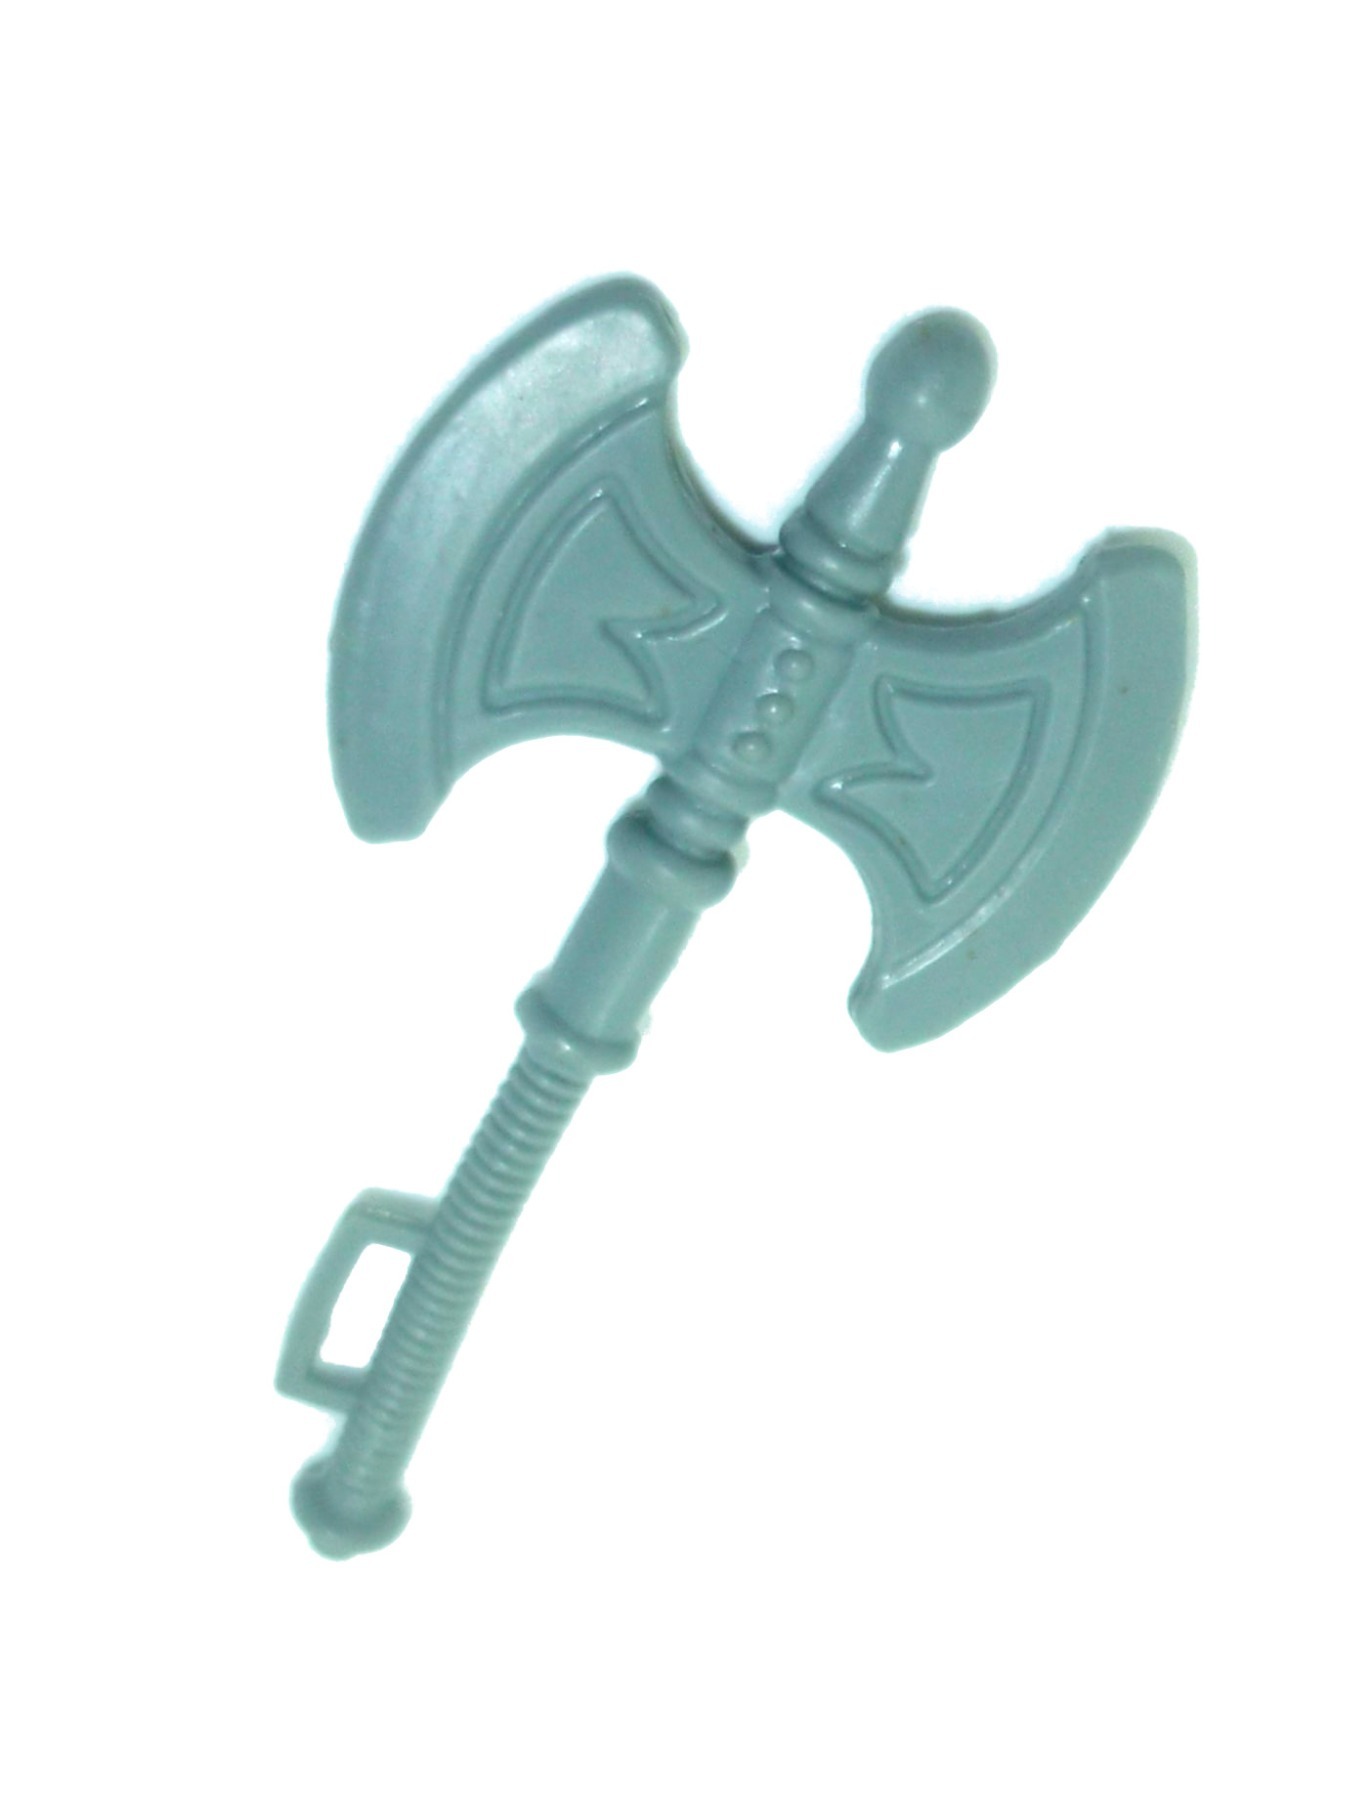 He-Man gray battle ax with straps Malaysia 2